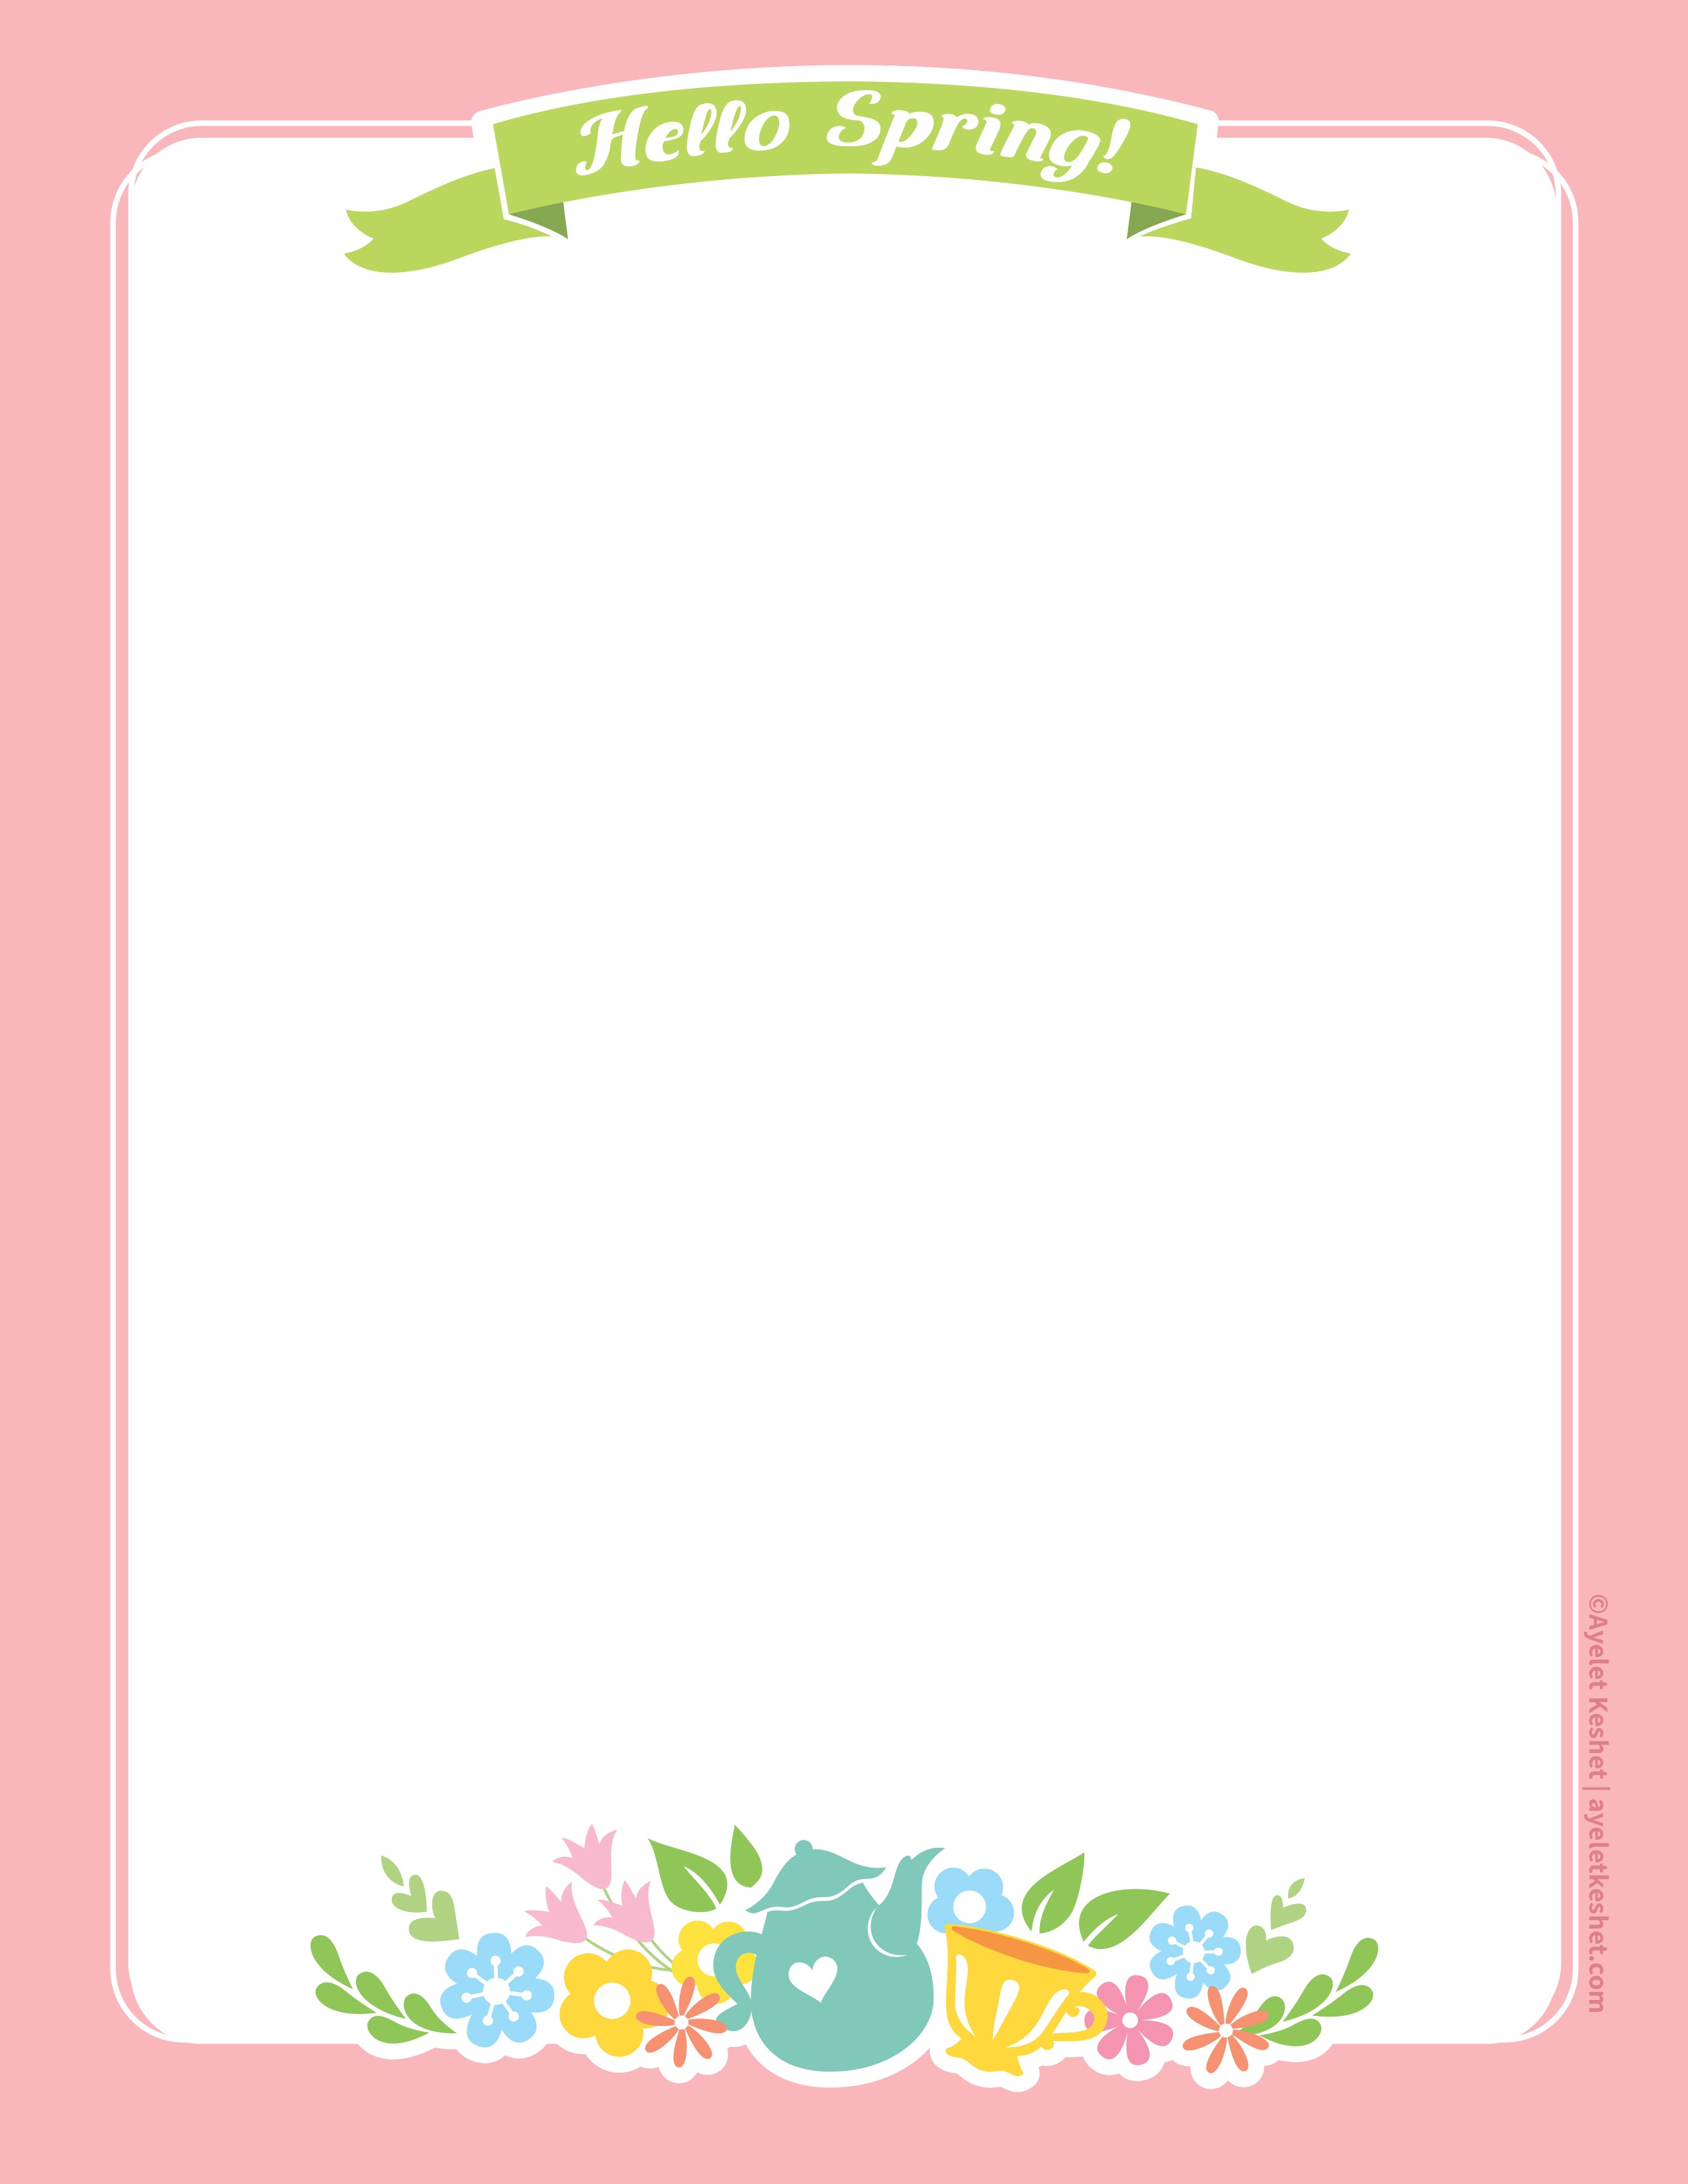 Lovely Free Printable Stationery Paper For Spring - Ayelet Keshet - Free Printable Stationery Paper